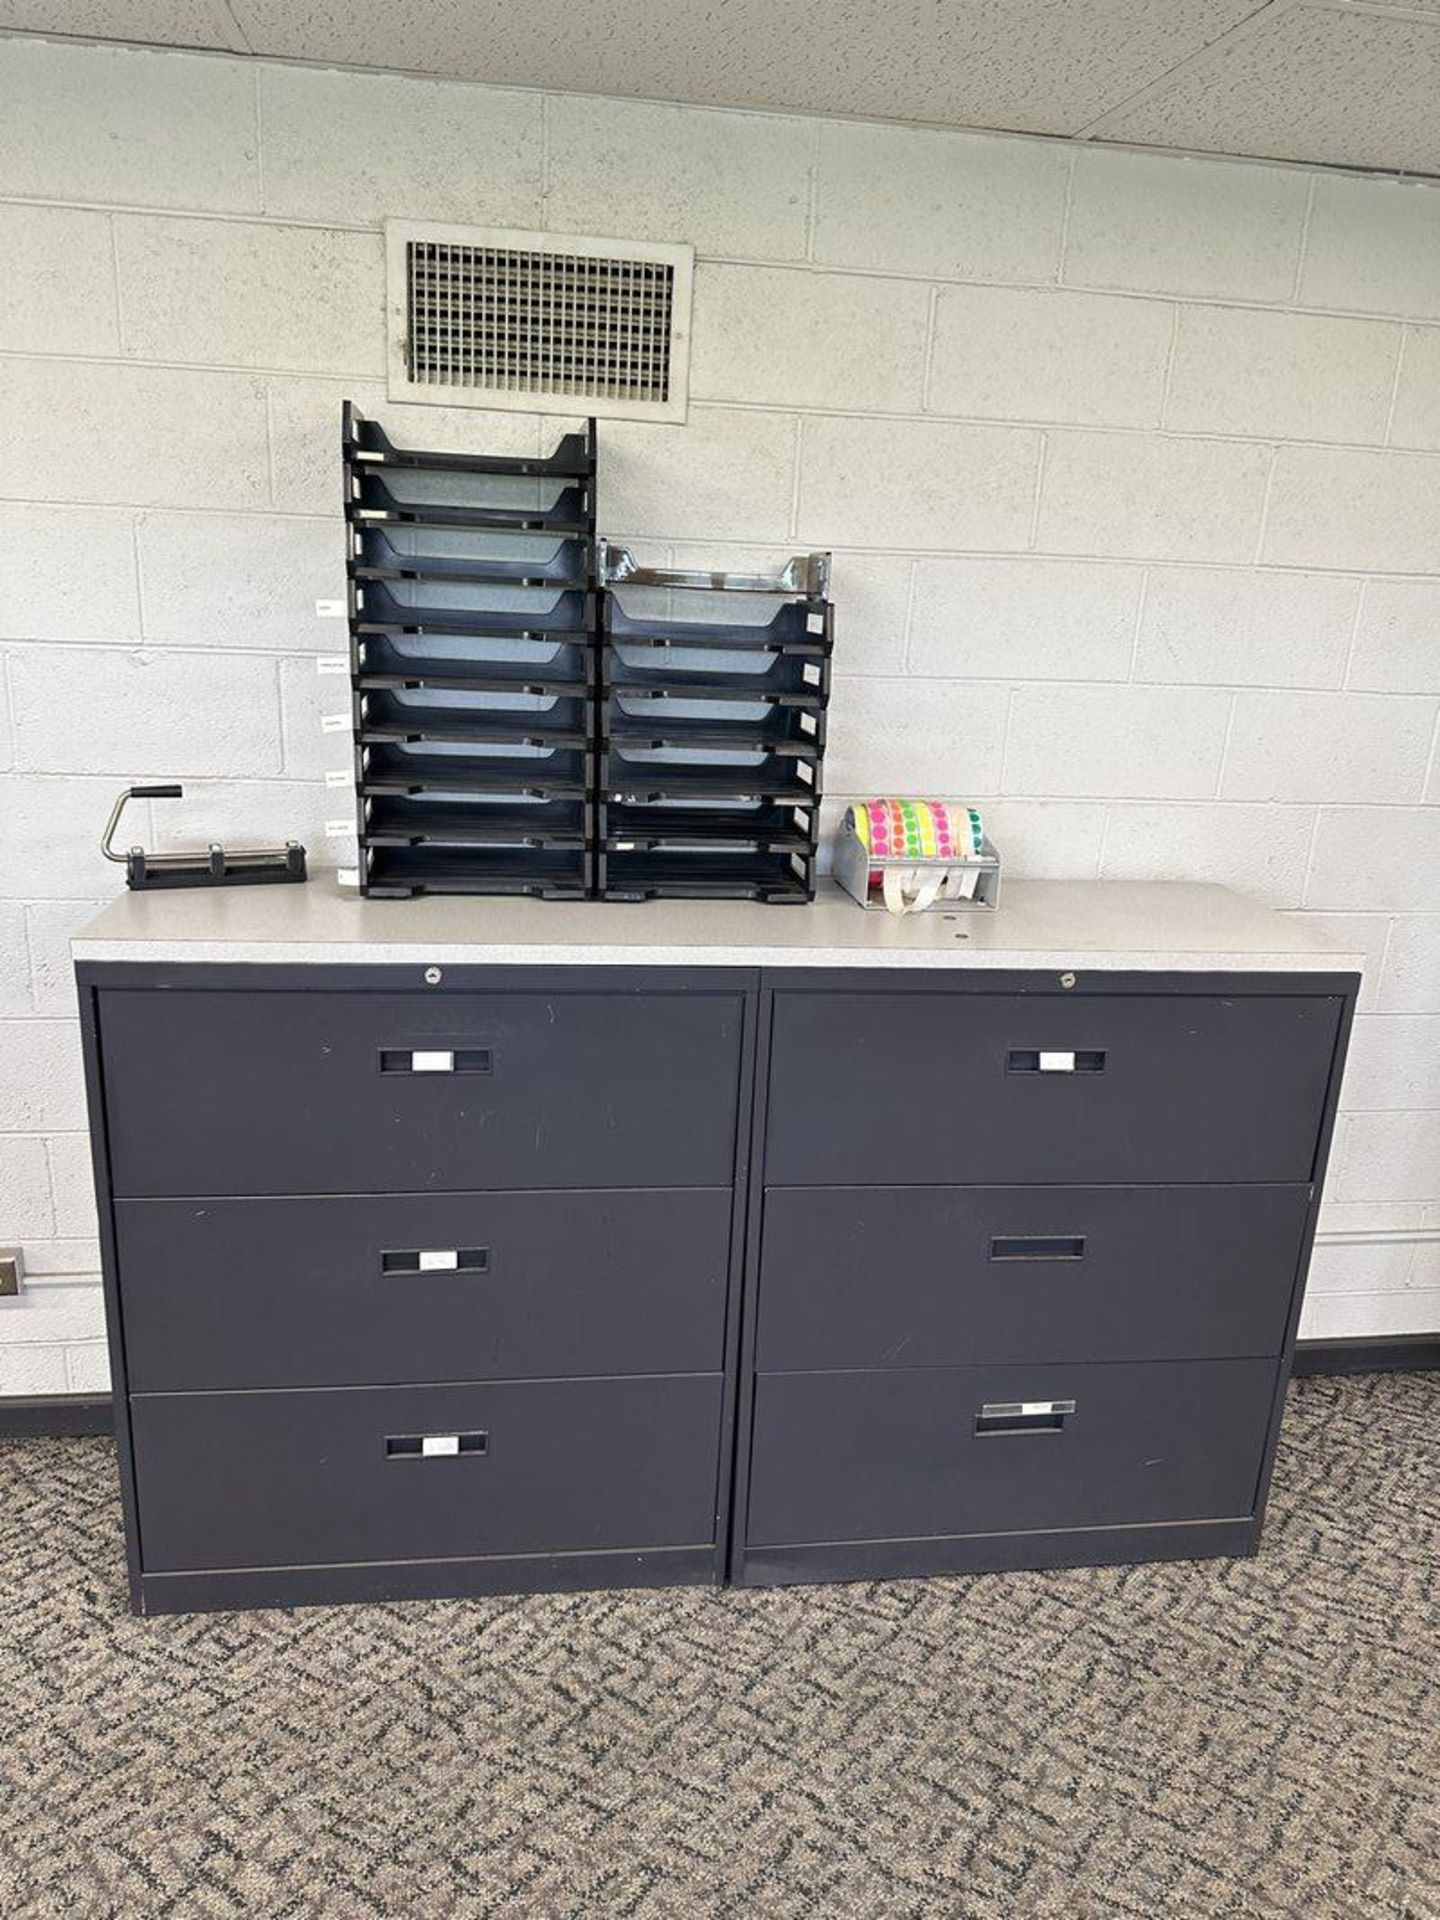 Lot of (4) Office Cubicles 98" x 86" and (2) 3-Drawer Filing Cabinets 41" T x 36" W x 18" D - Image 5 of 5